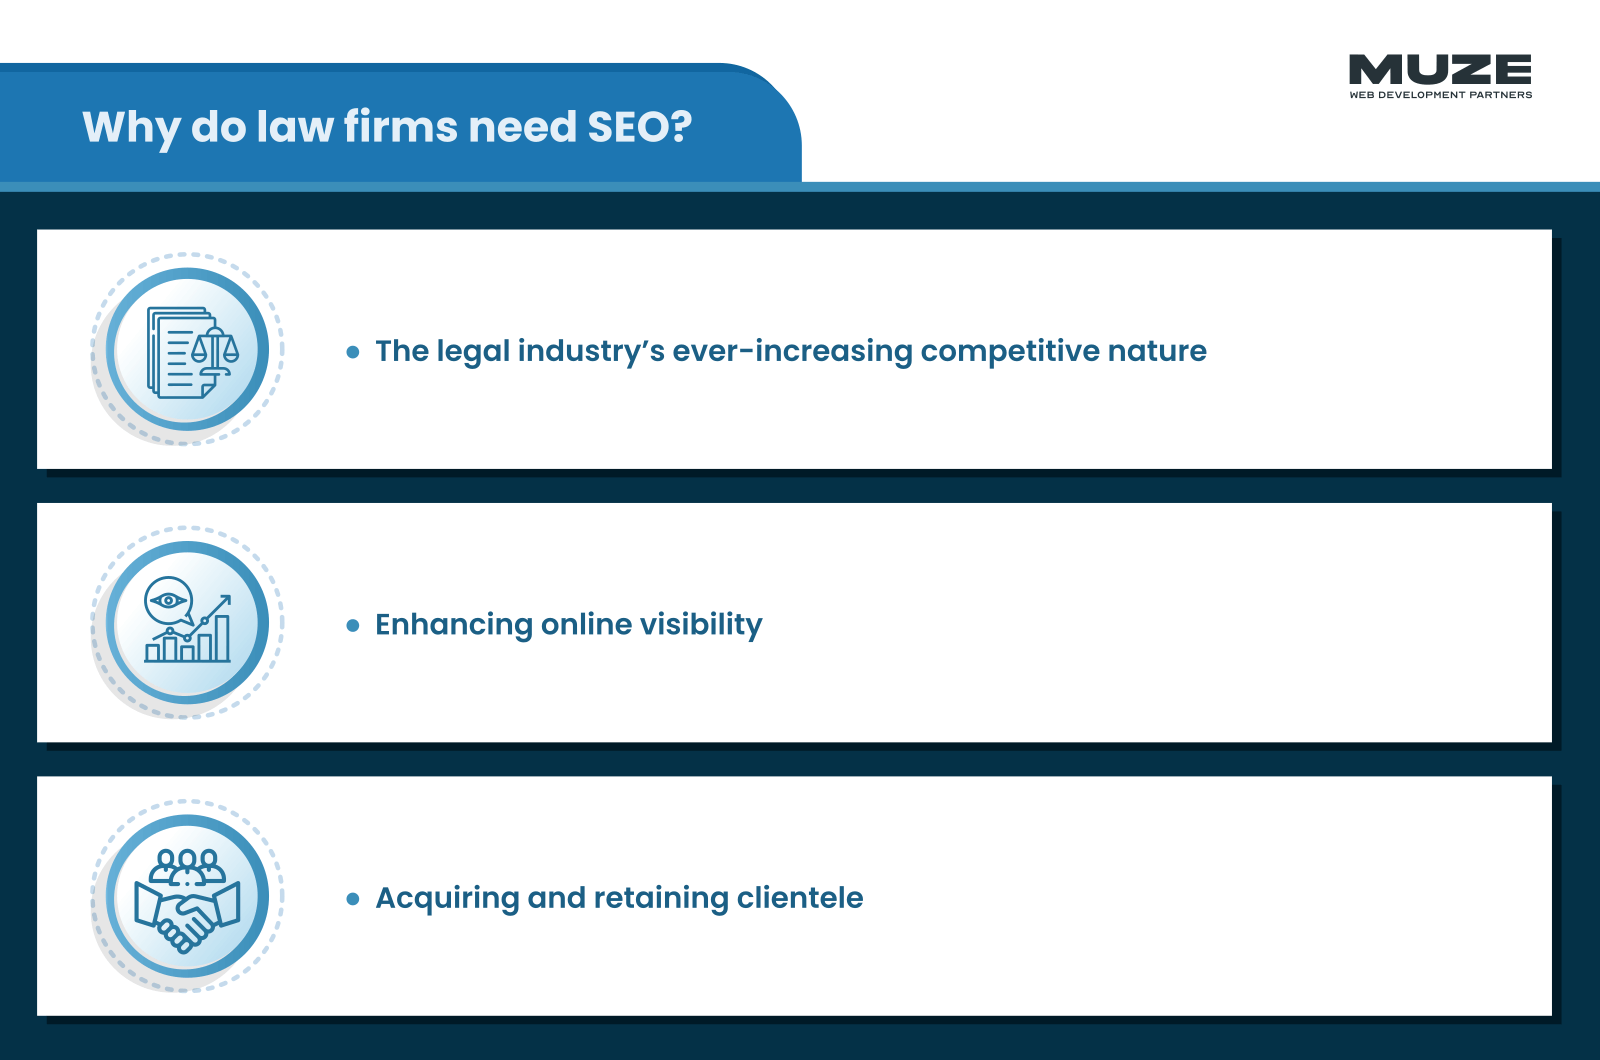 Why do law firms need SEO? - Law Firm SEO Services